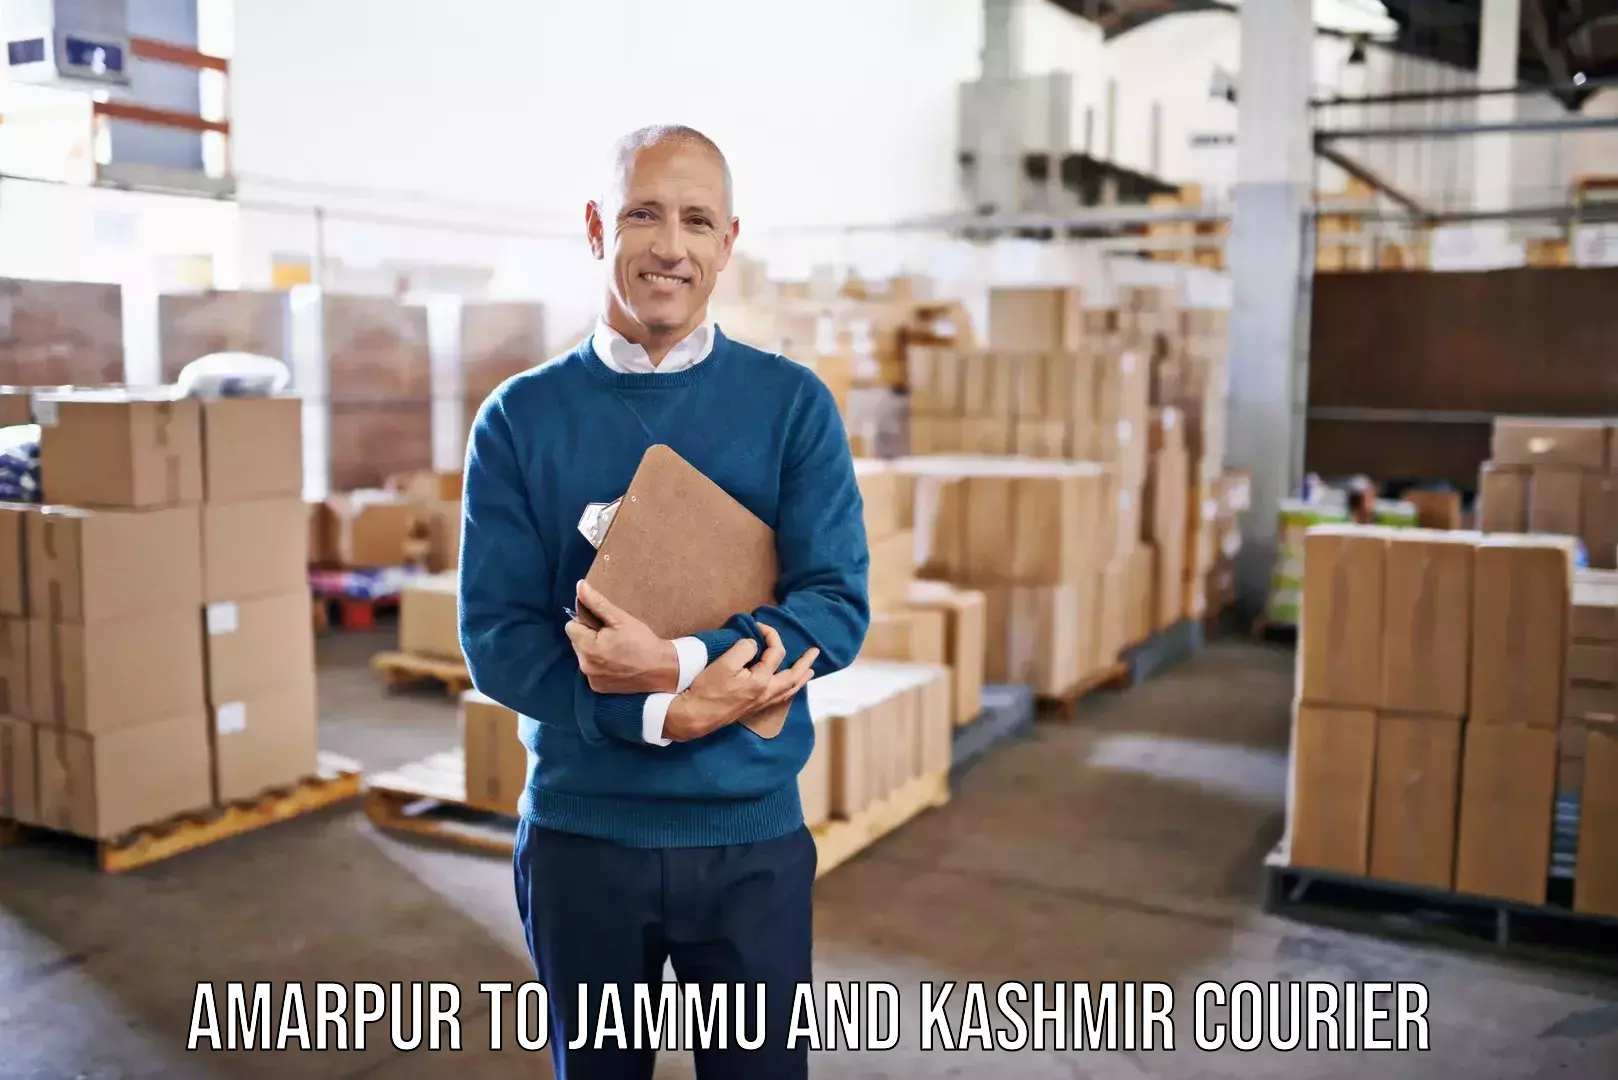 Household moving experts Amarpur to Jammu and Kashmir